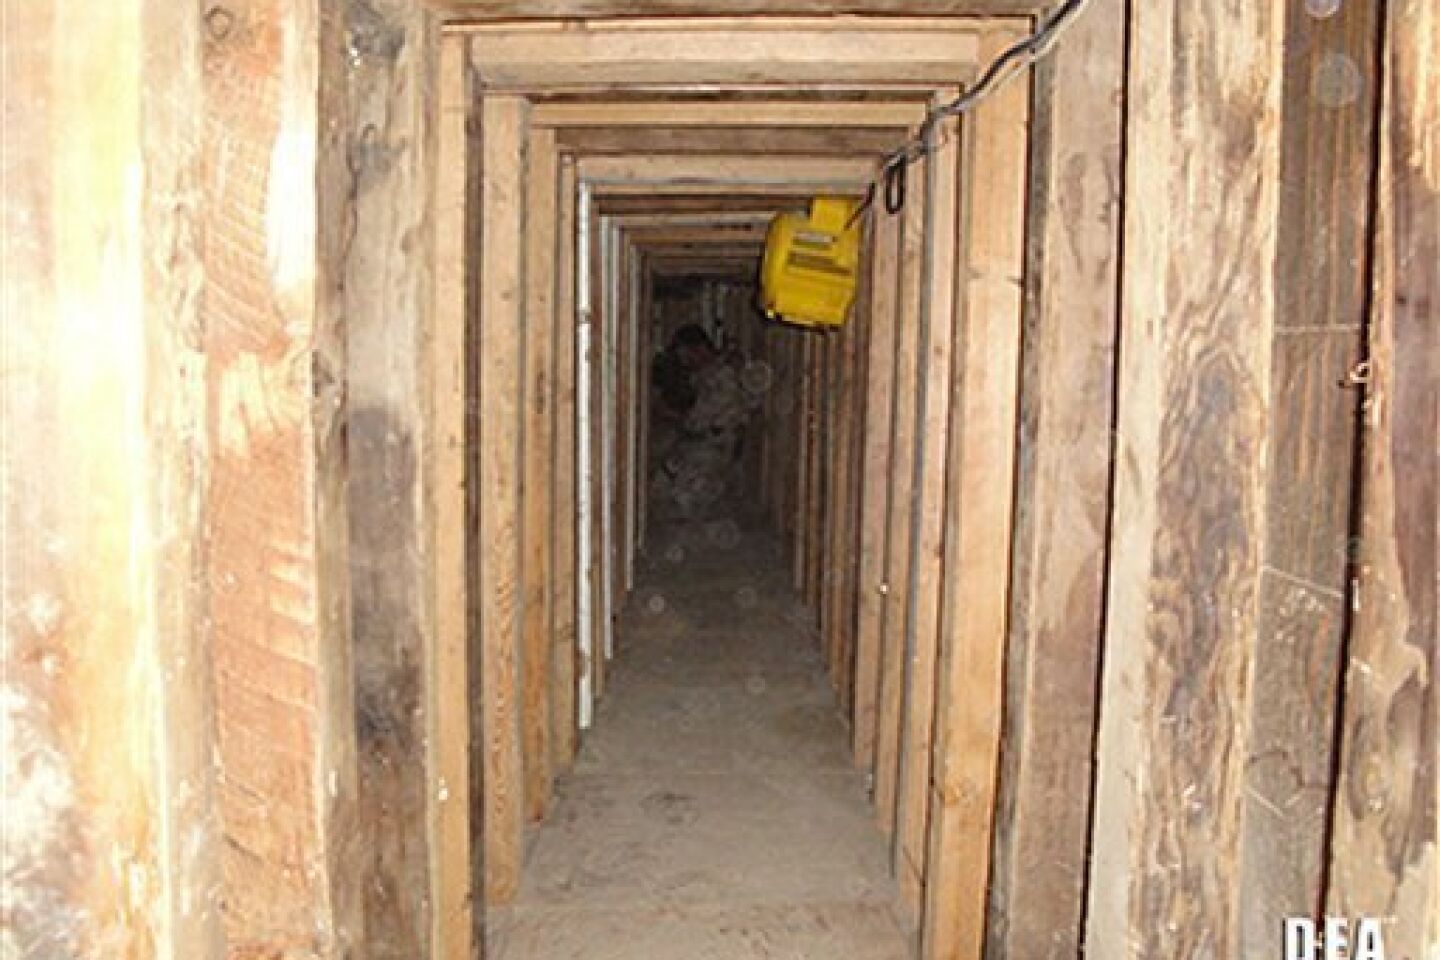 In this undated photo provided by the United States Drug Enforcement Administration, shows a 240-yard, a complete and fully operational drug smuggling tunnel, from the U.S. side of the tunnerl, that ran from a small business in Arizona to an ice plant on the Mexico side of the border, Thursday, Jul